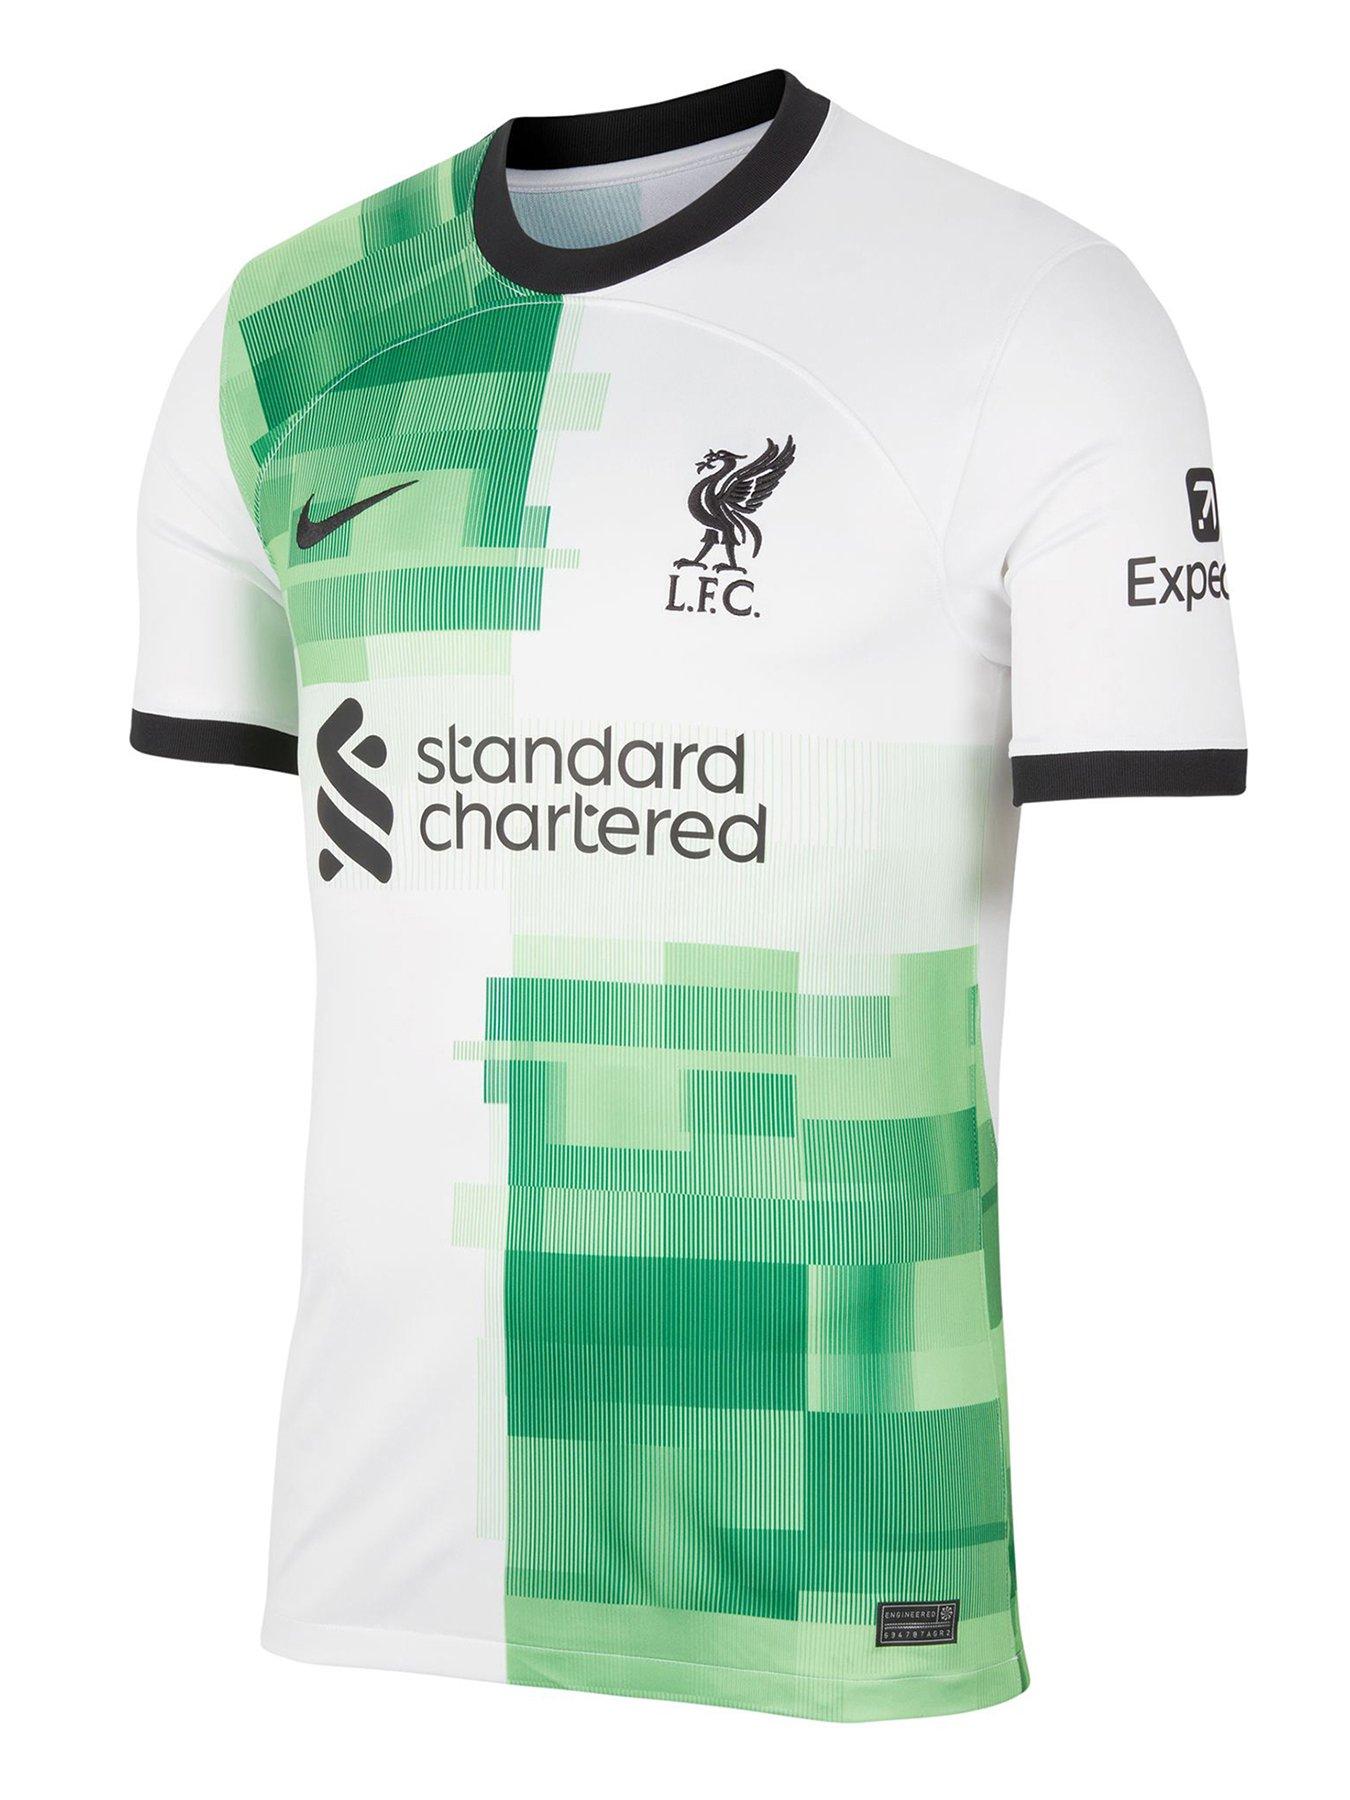 Celtic 12/13 Nike 125th Anniversary Home Kit - Football Shirt Culture -  Latest Football Kit News and More